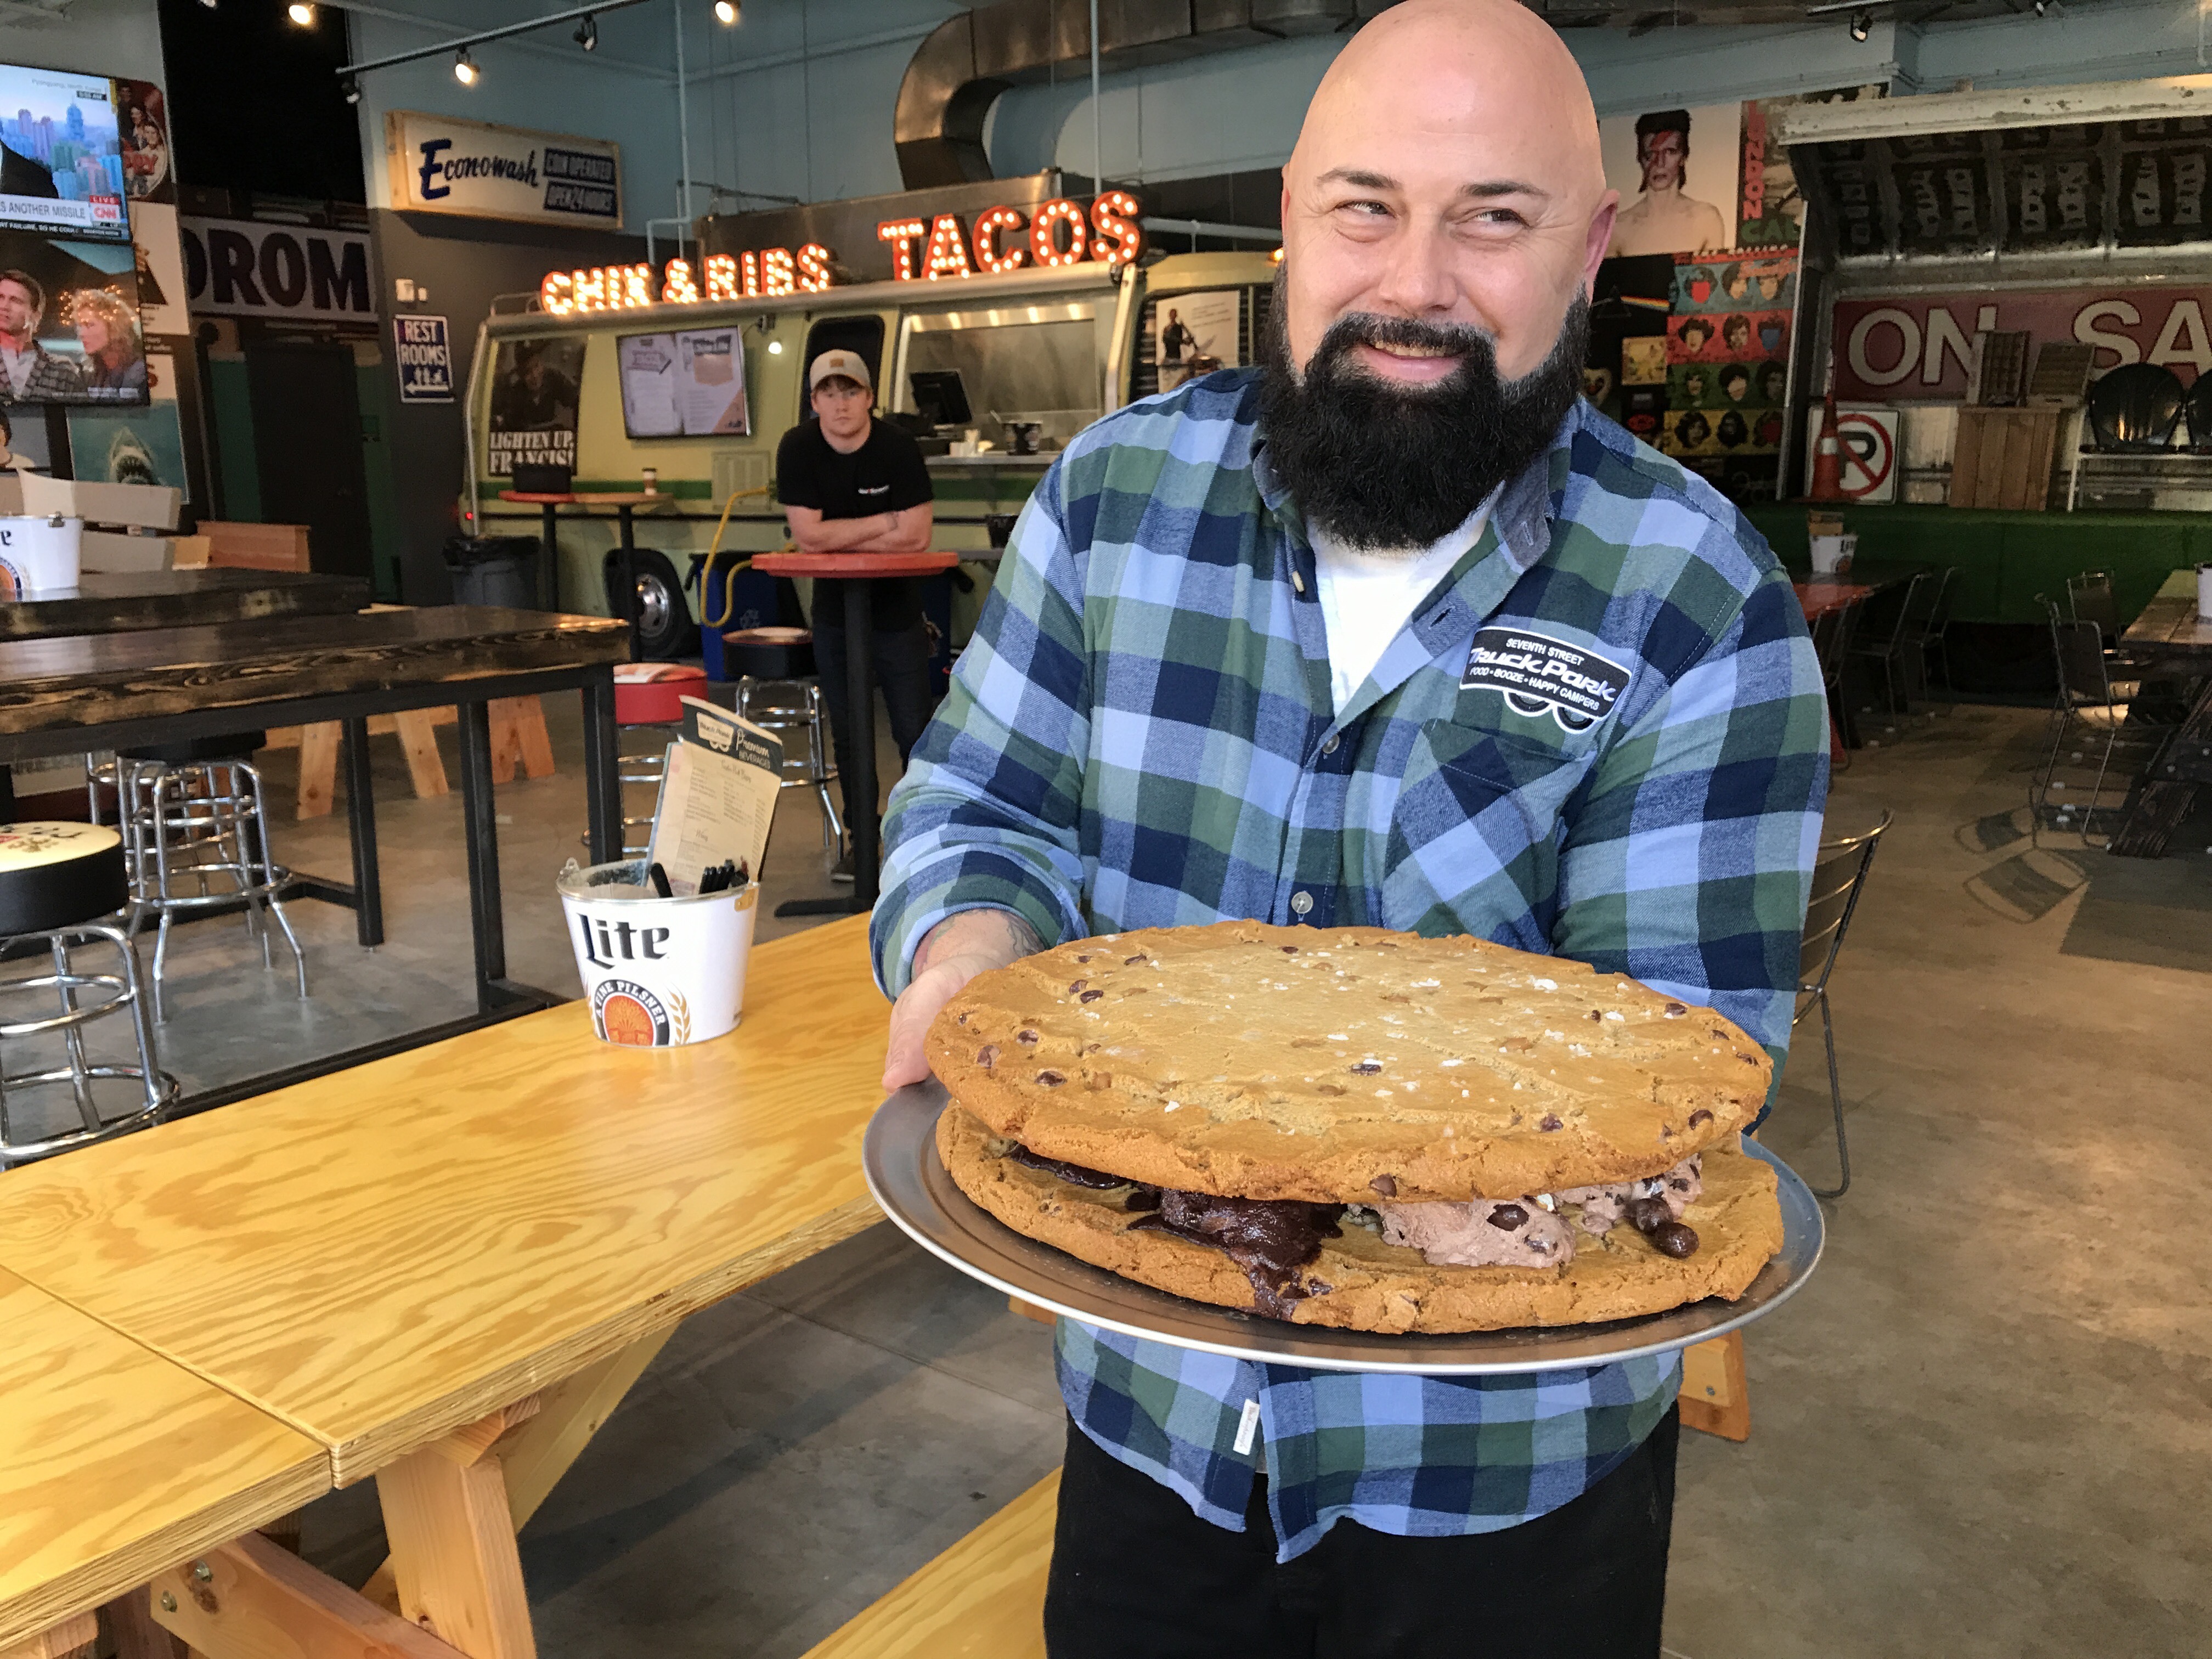 Brian Ingram, owner of Truck Park, holds one of his giant ice cream sandwiches.